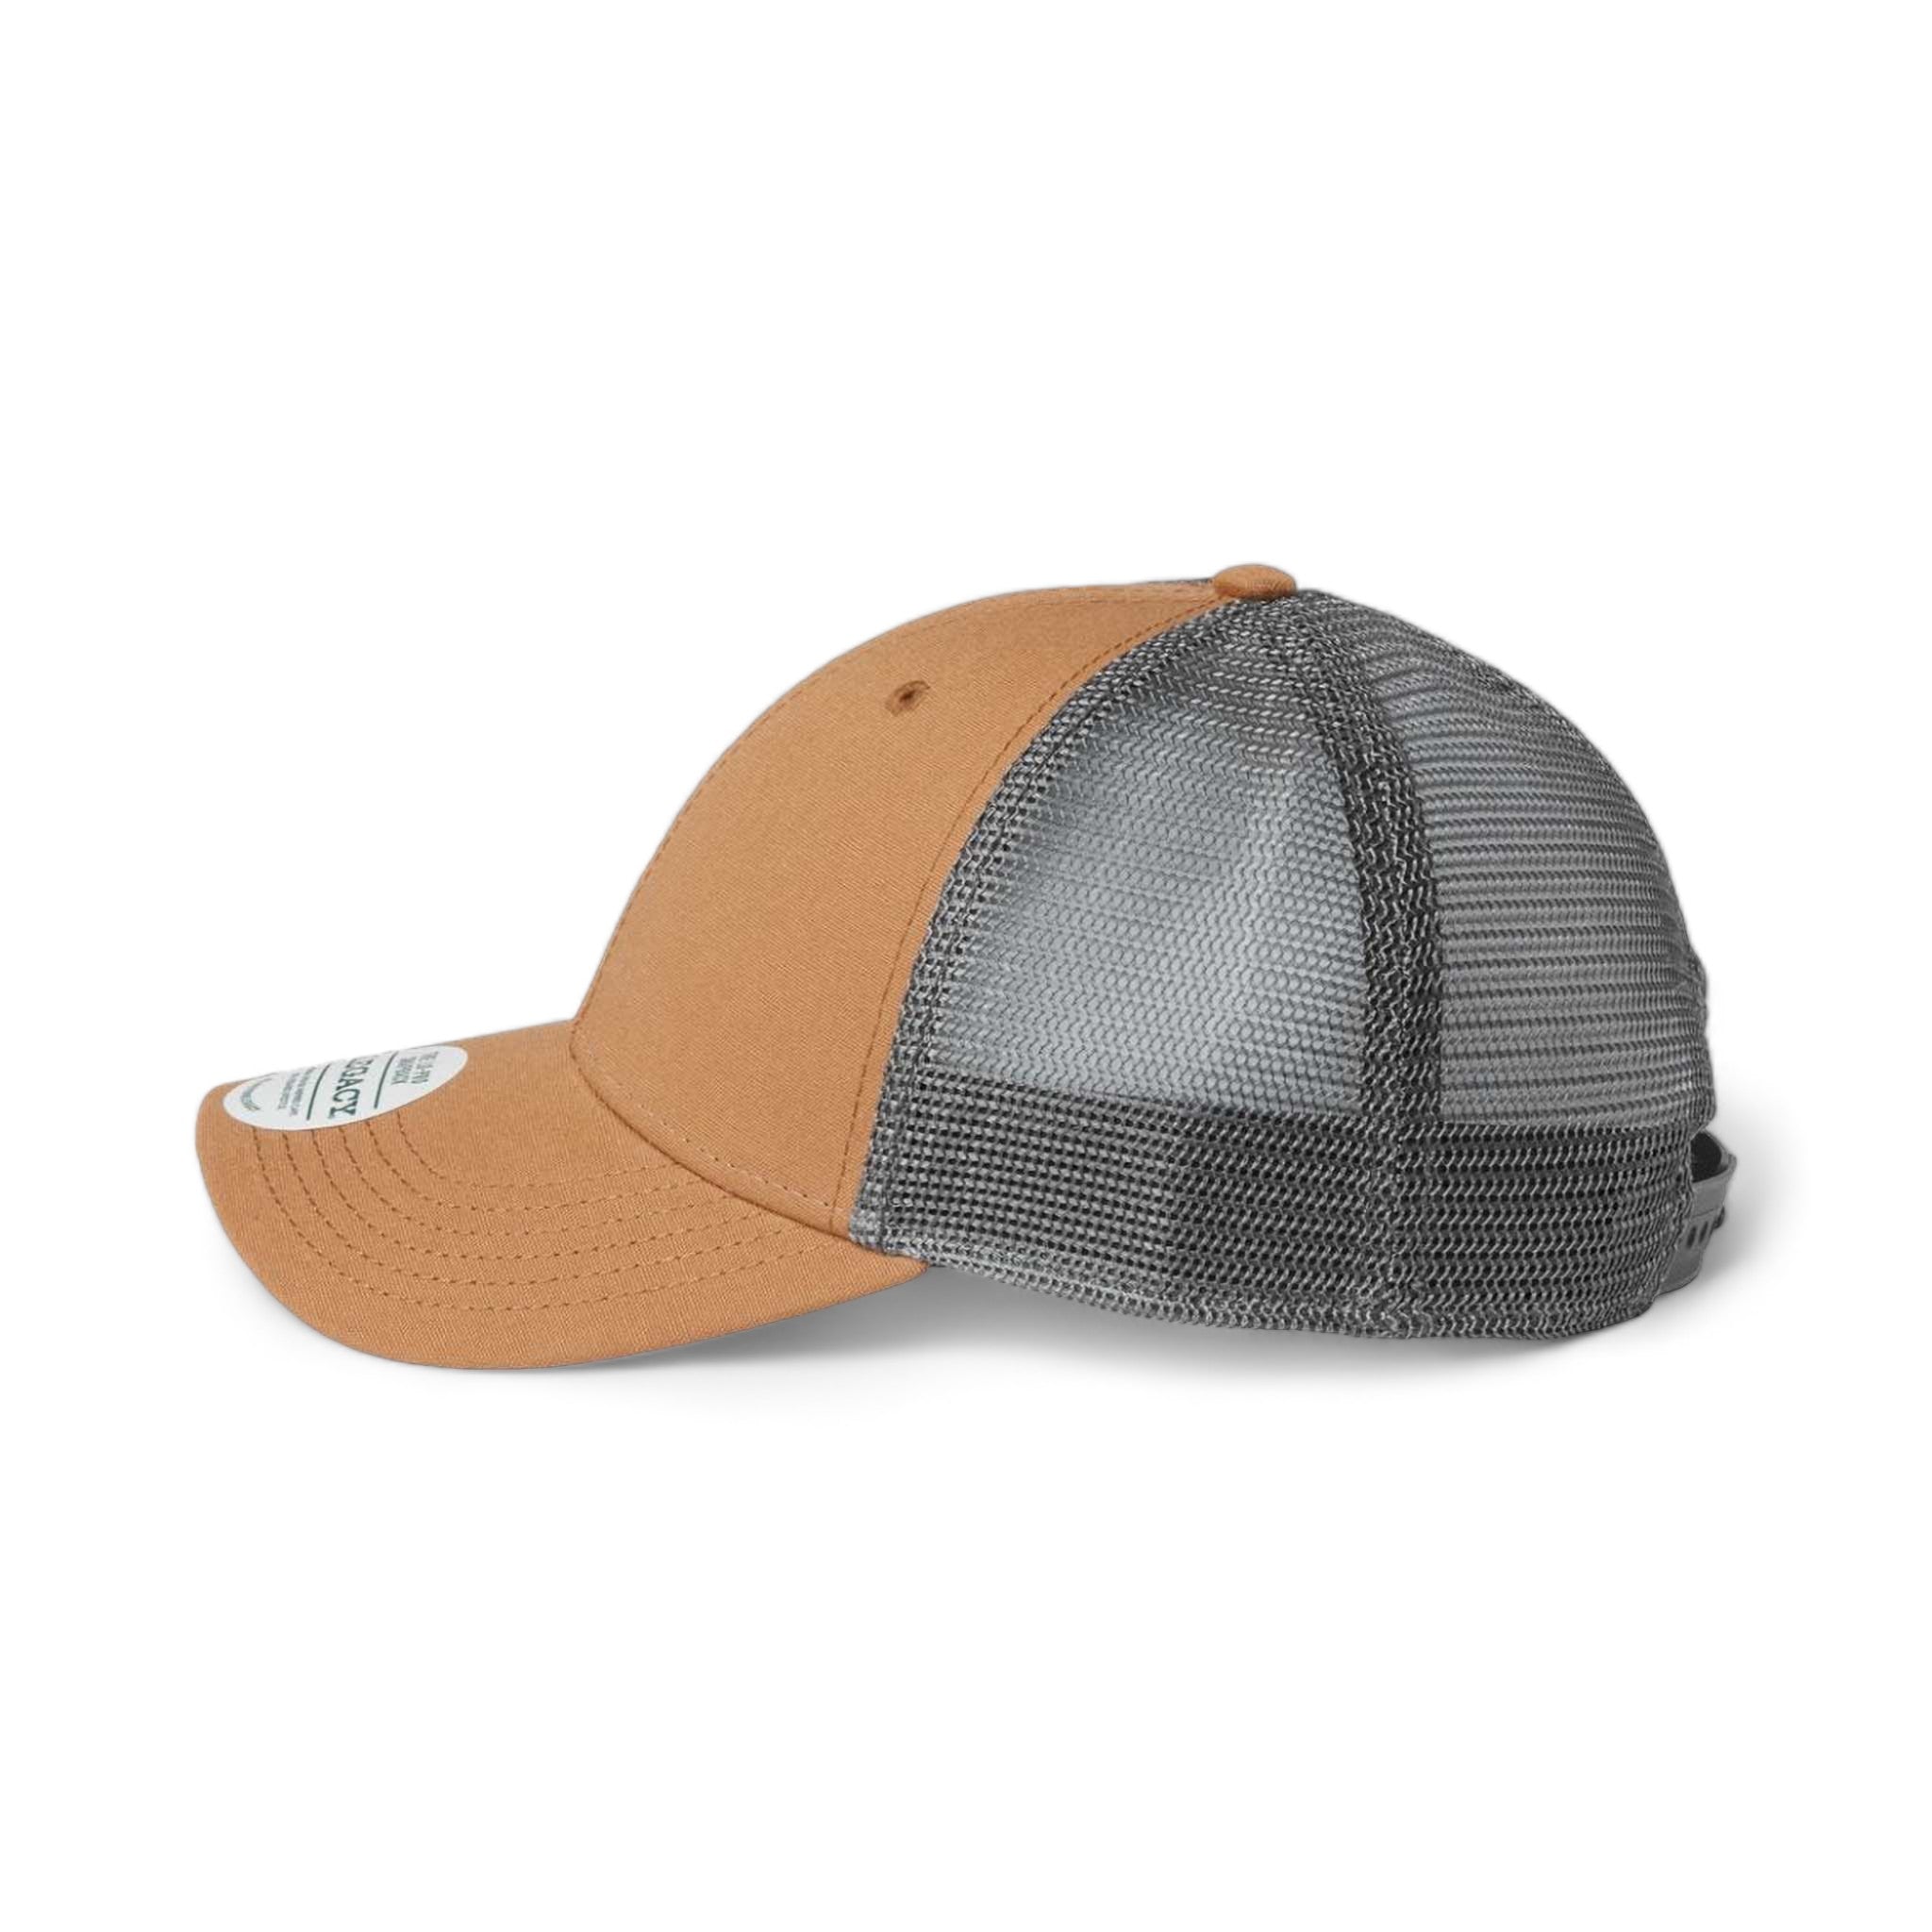 Side view of LEGACY LPS custom hat in caramel and dark grey